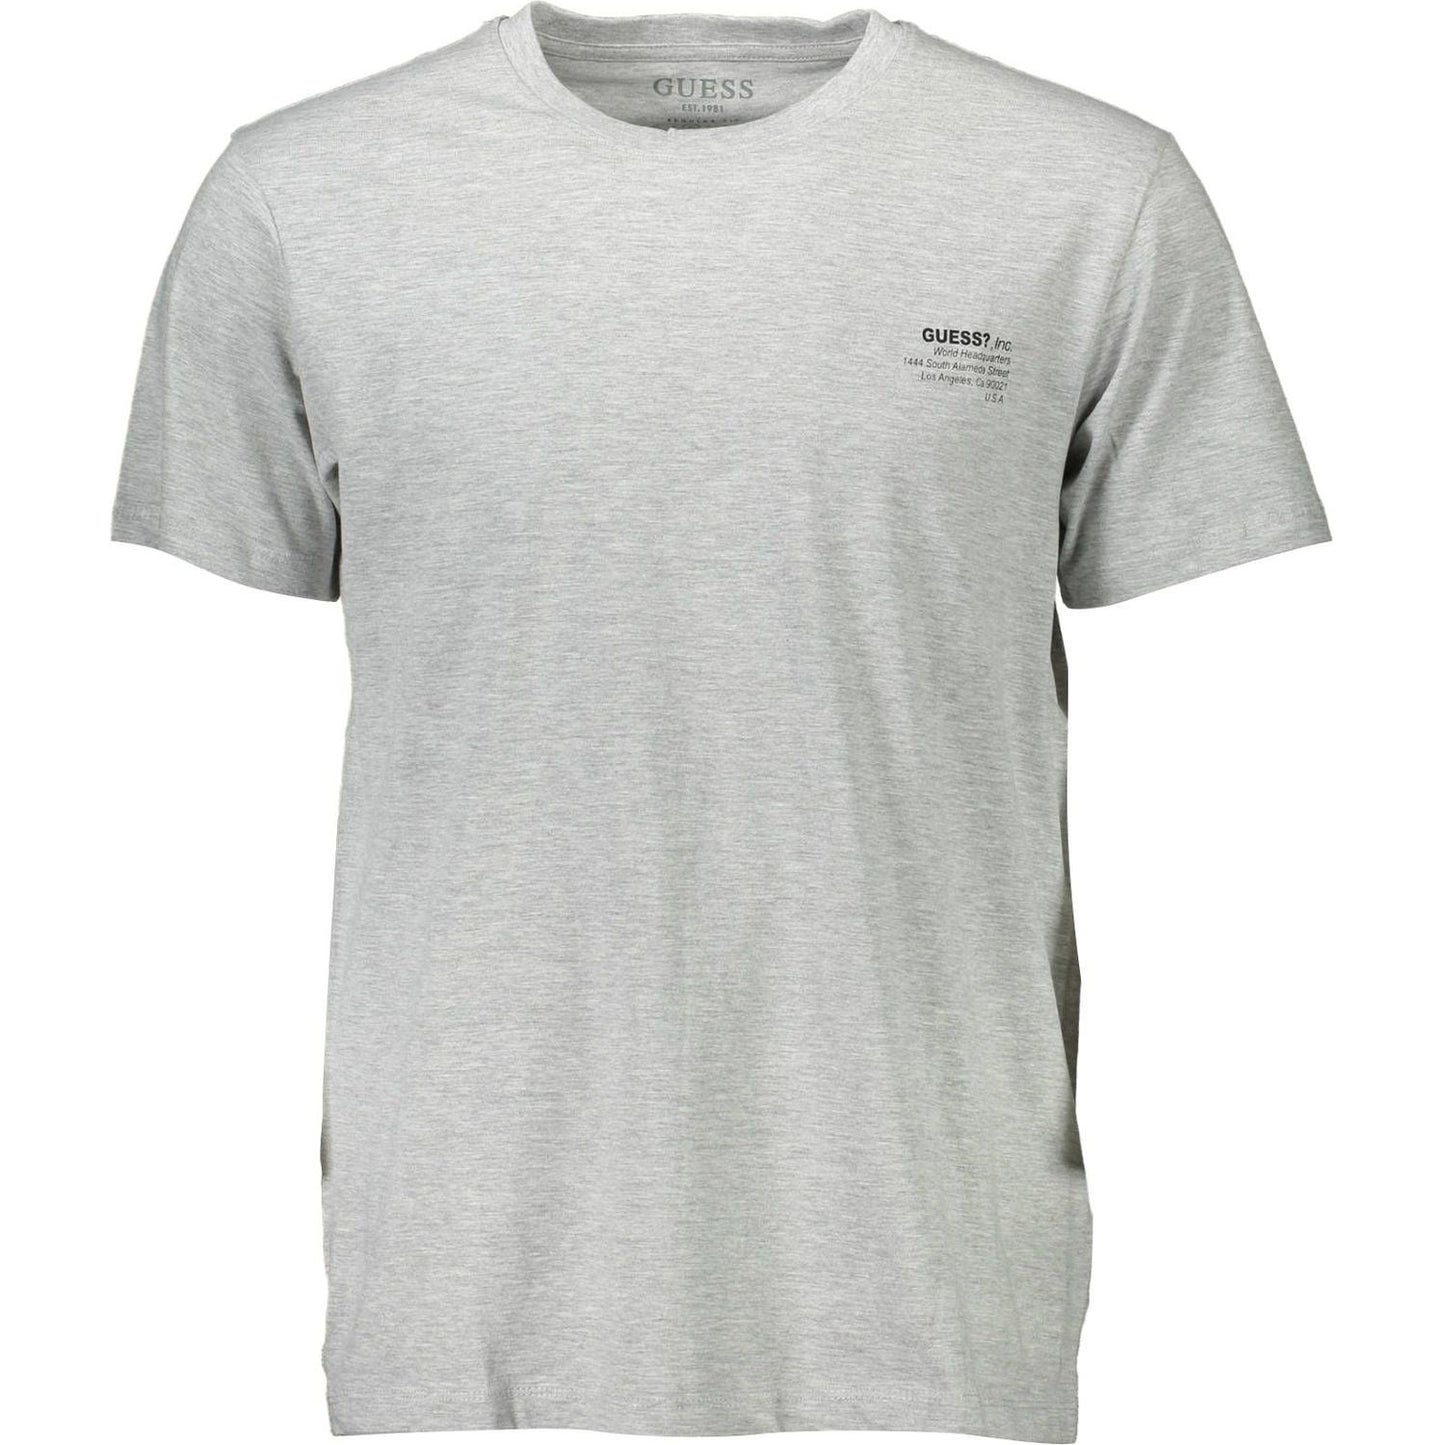 Guess Jeans Classic Gray Crew Neck Logo Tee classic-gray-crew-neck-logo-tee